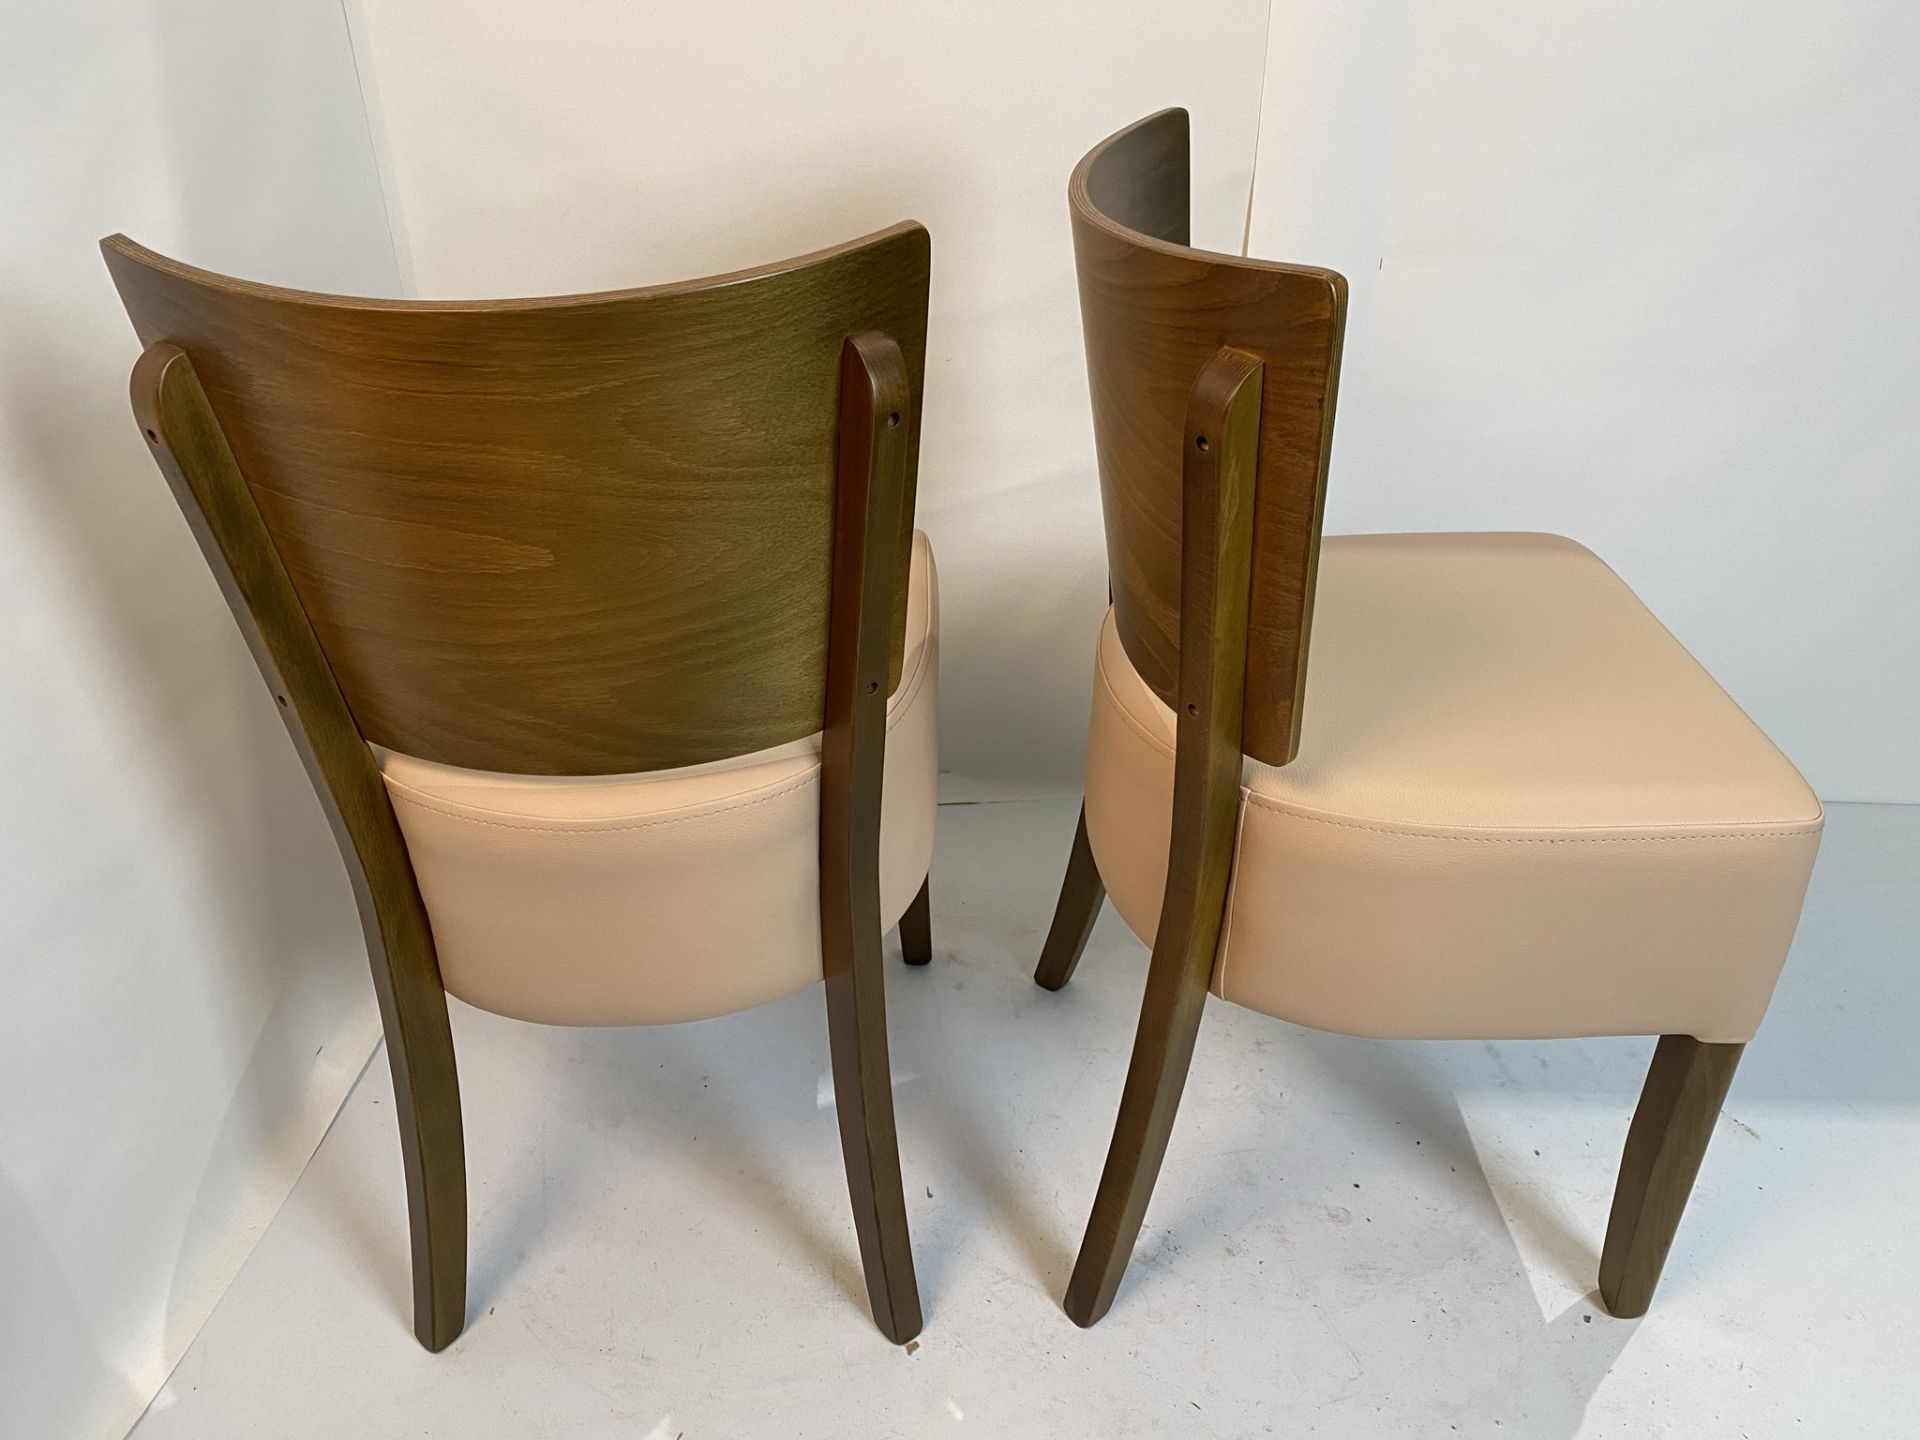 2 x Rebecca Vena BE-10 dining/side chairs with B. - Image 4 of 6